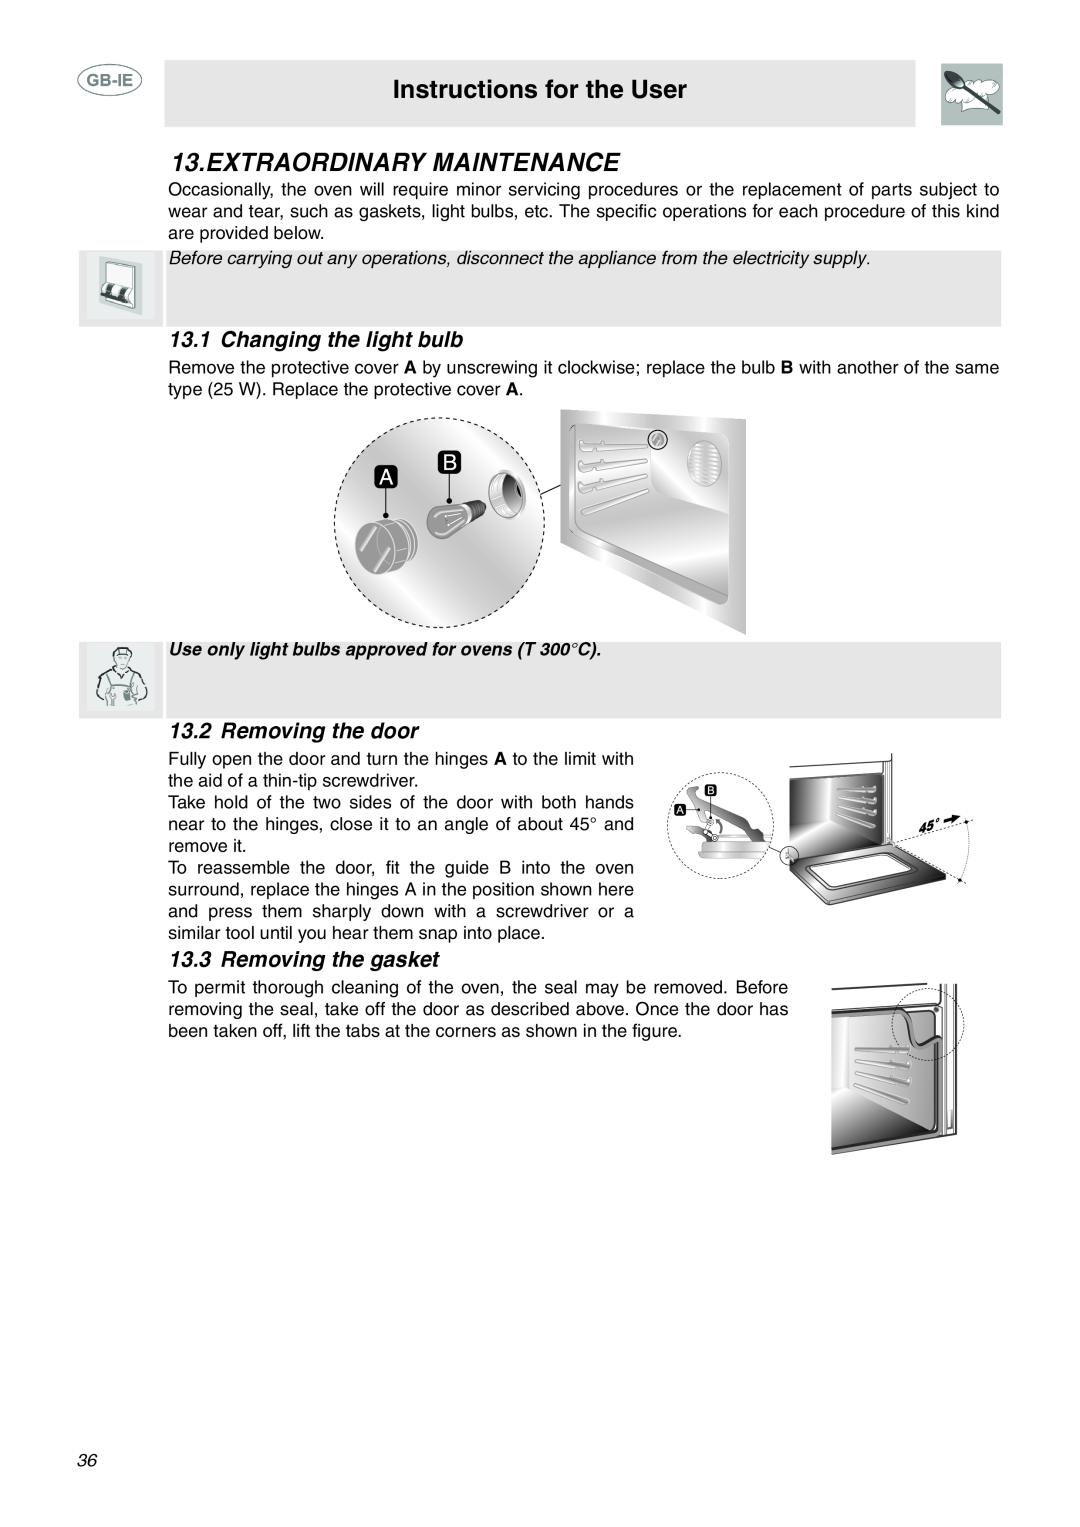 Smeg C6GMX manual Extraordinary Maintenance, Changing the light bulb, Removing the door, Removing the gasket 